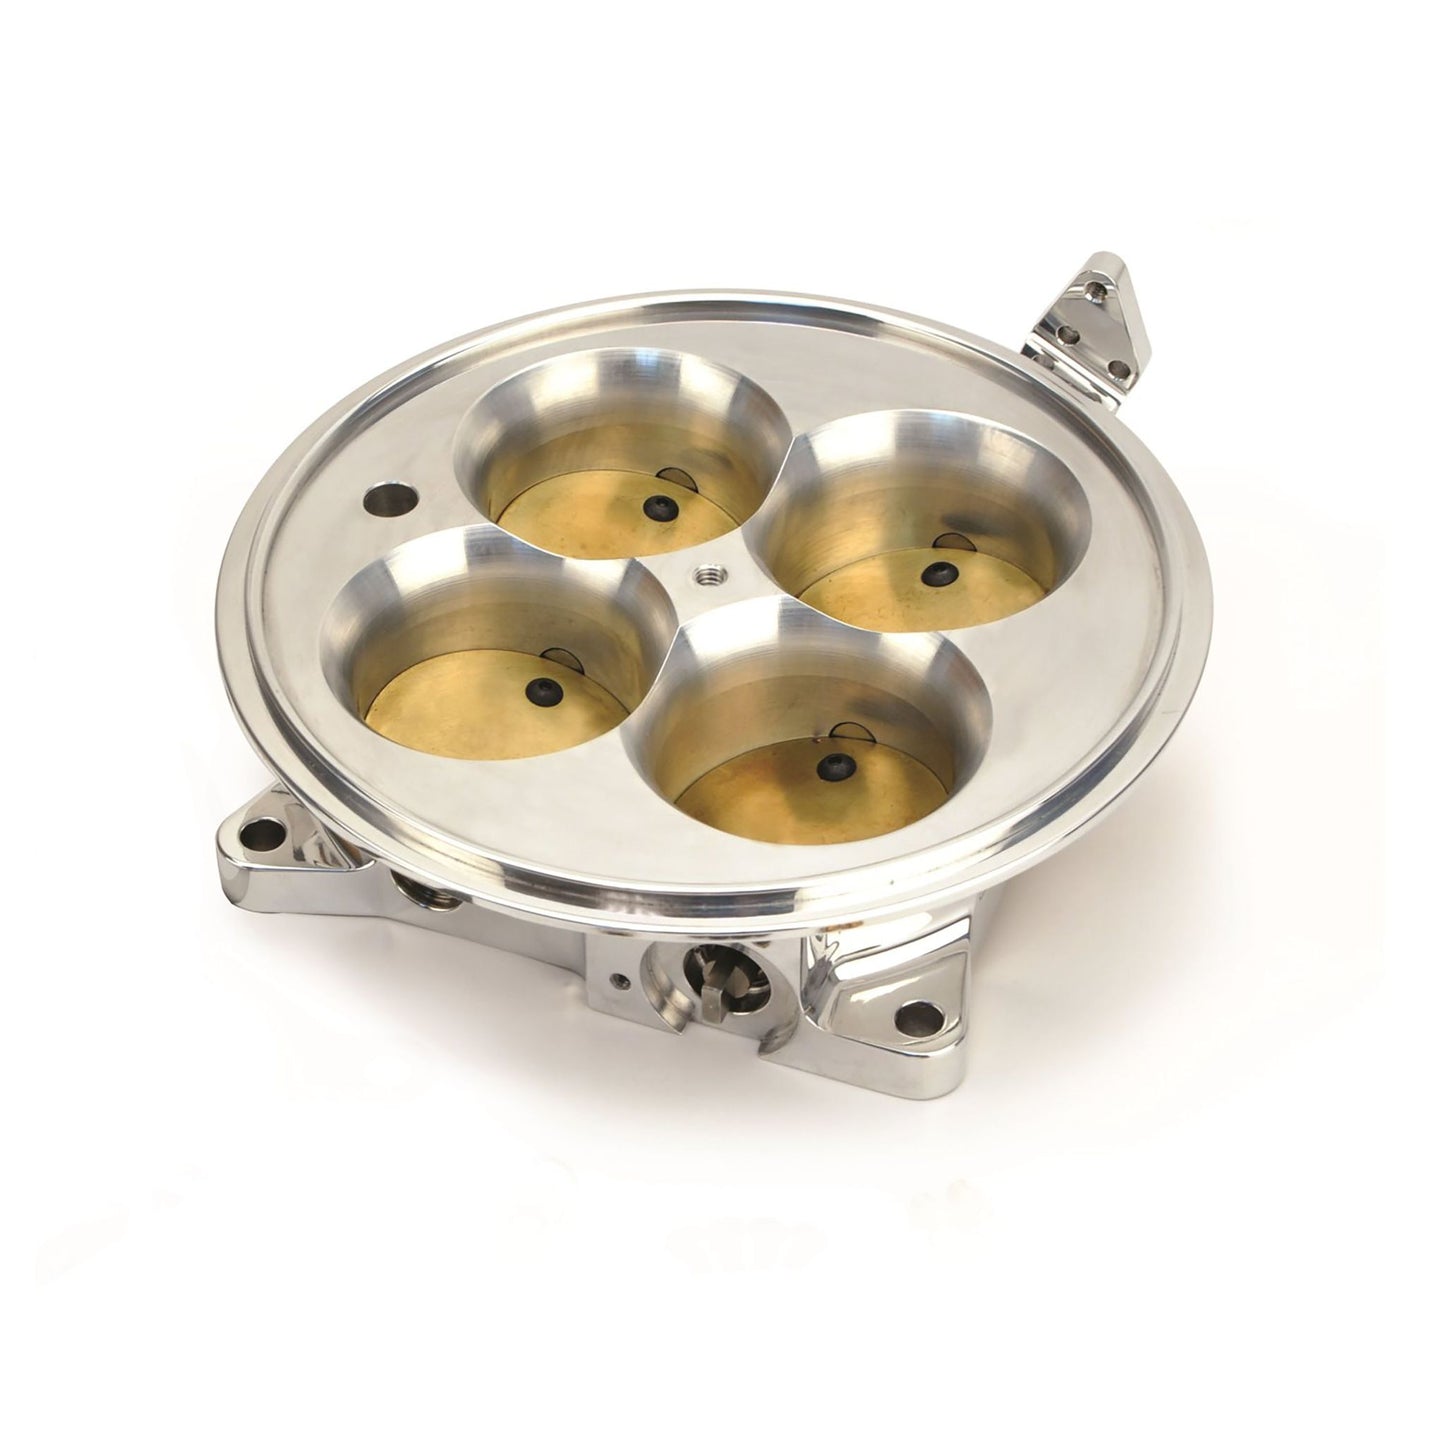 FAST Polished 4500 Flange Air Only Throttle Body for Multiport Injection EFI Systems 307604P